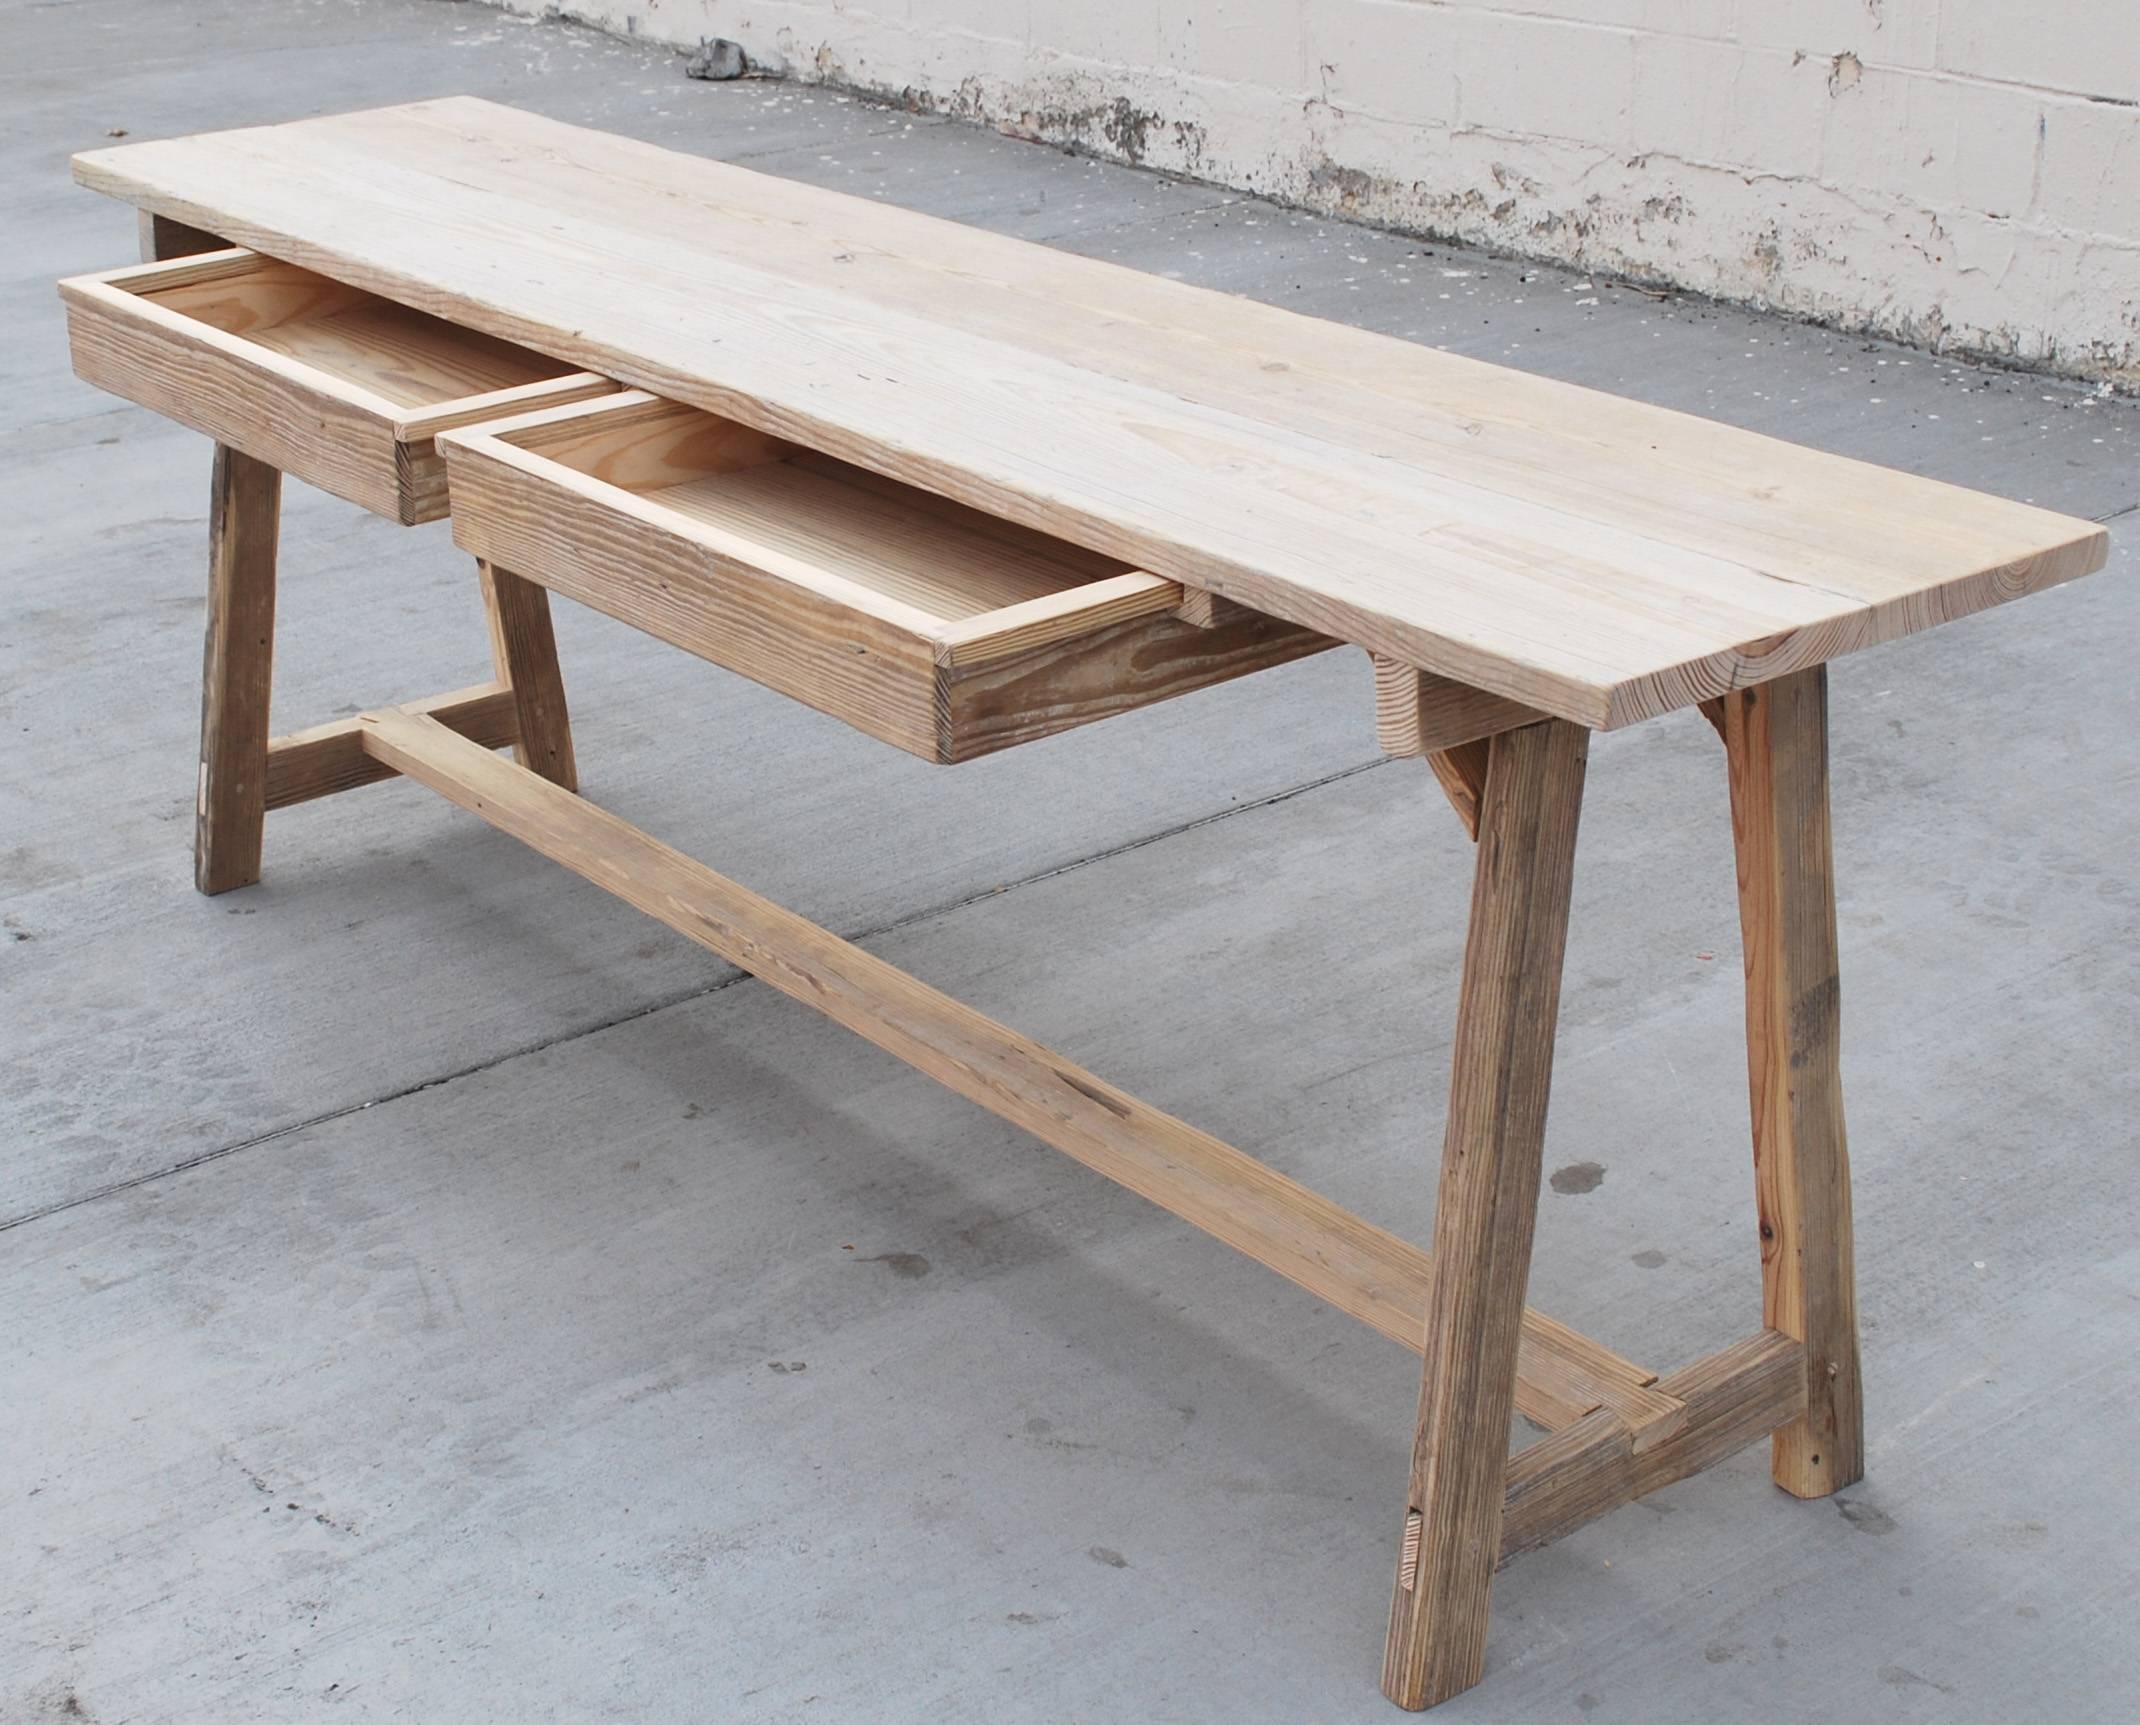 Contemporary Made to Order Console Table or Work Table in Reclaimed Wood by Petersen Antiques